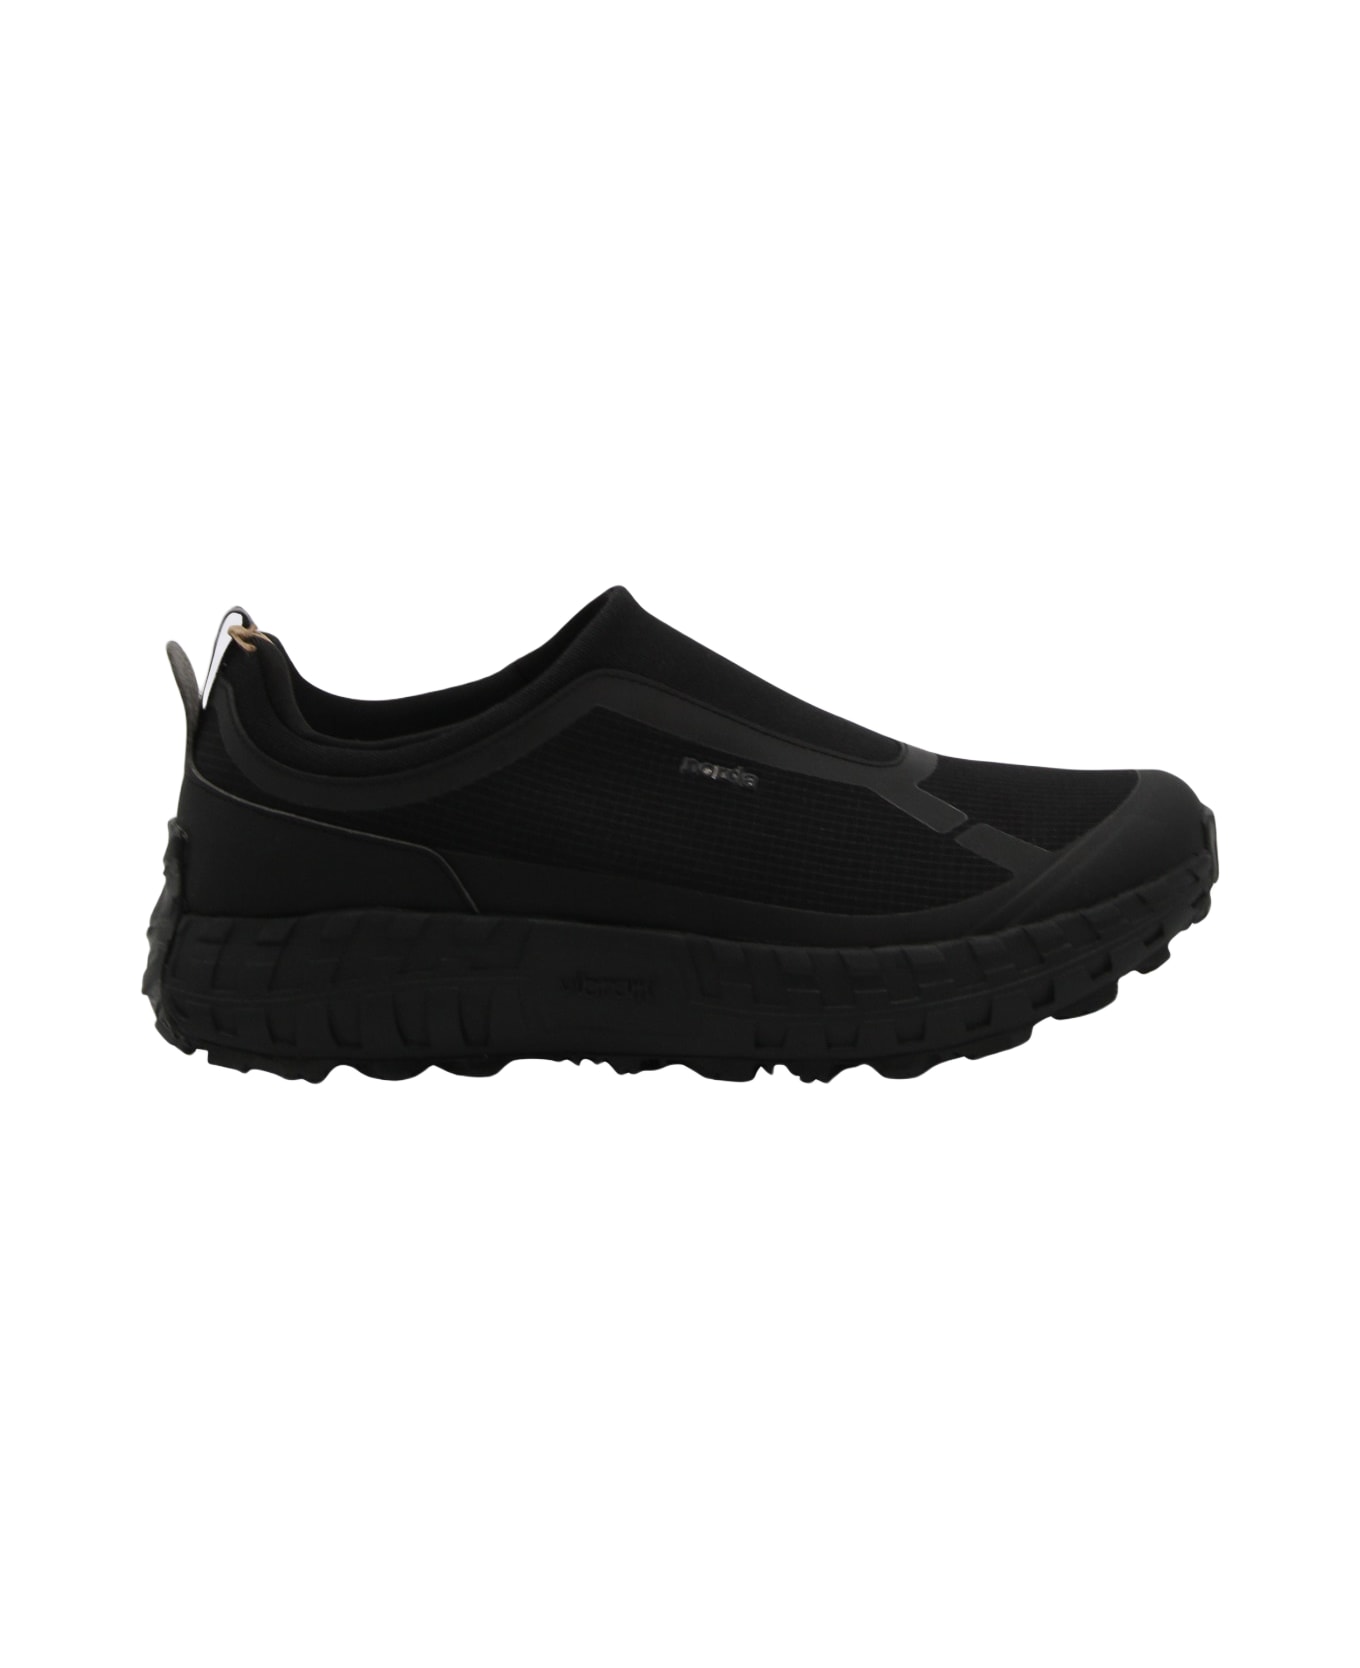 Norda Black The 003 W Pitch Sneakers - Black スニーカー